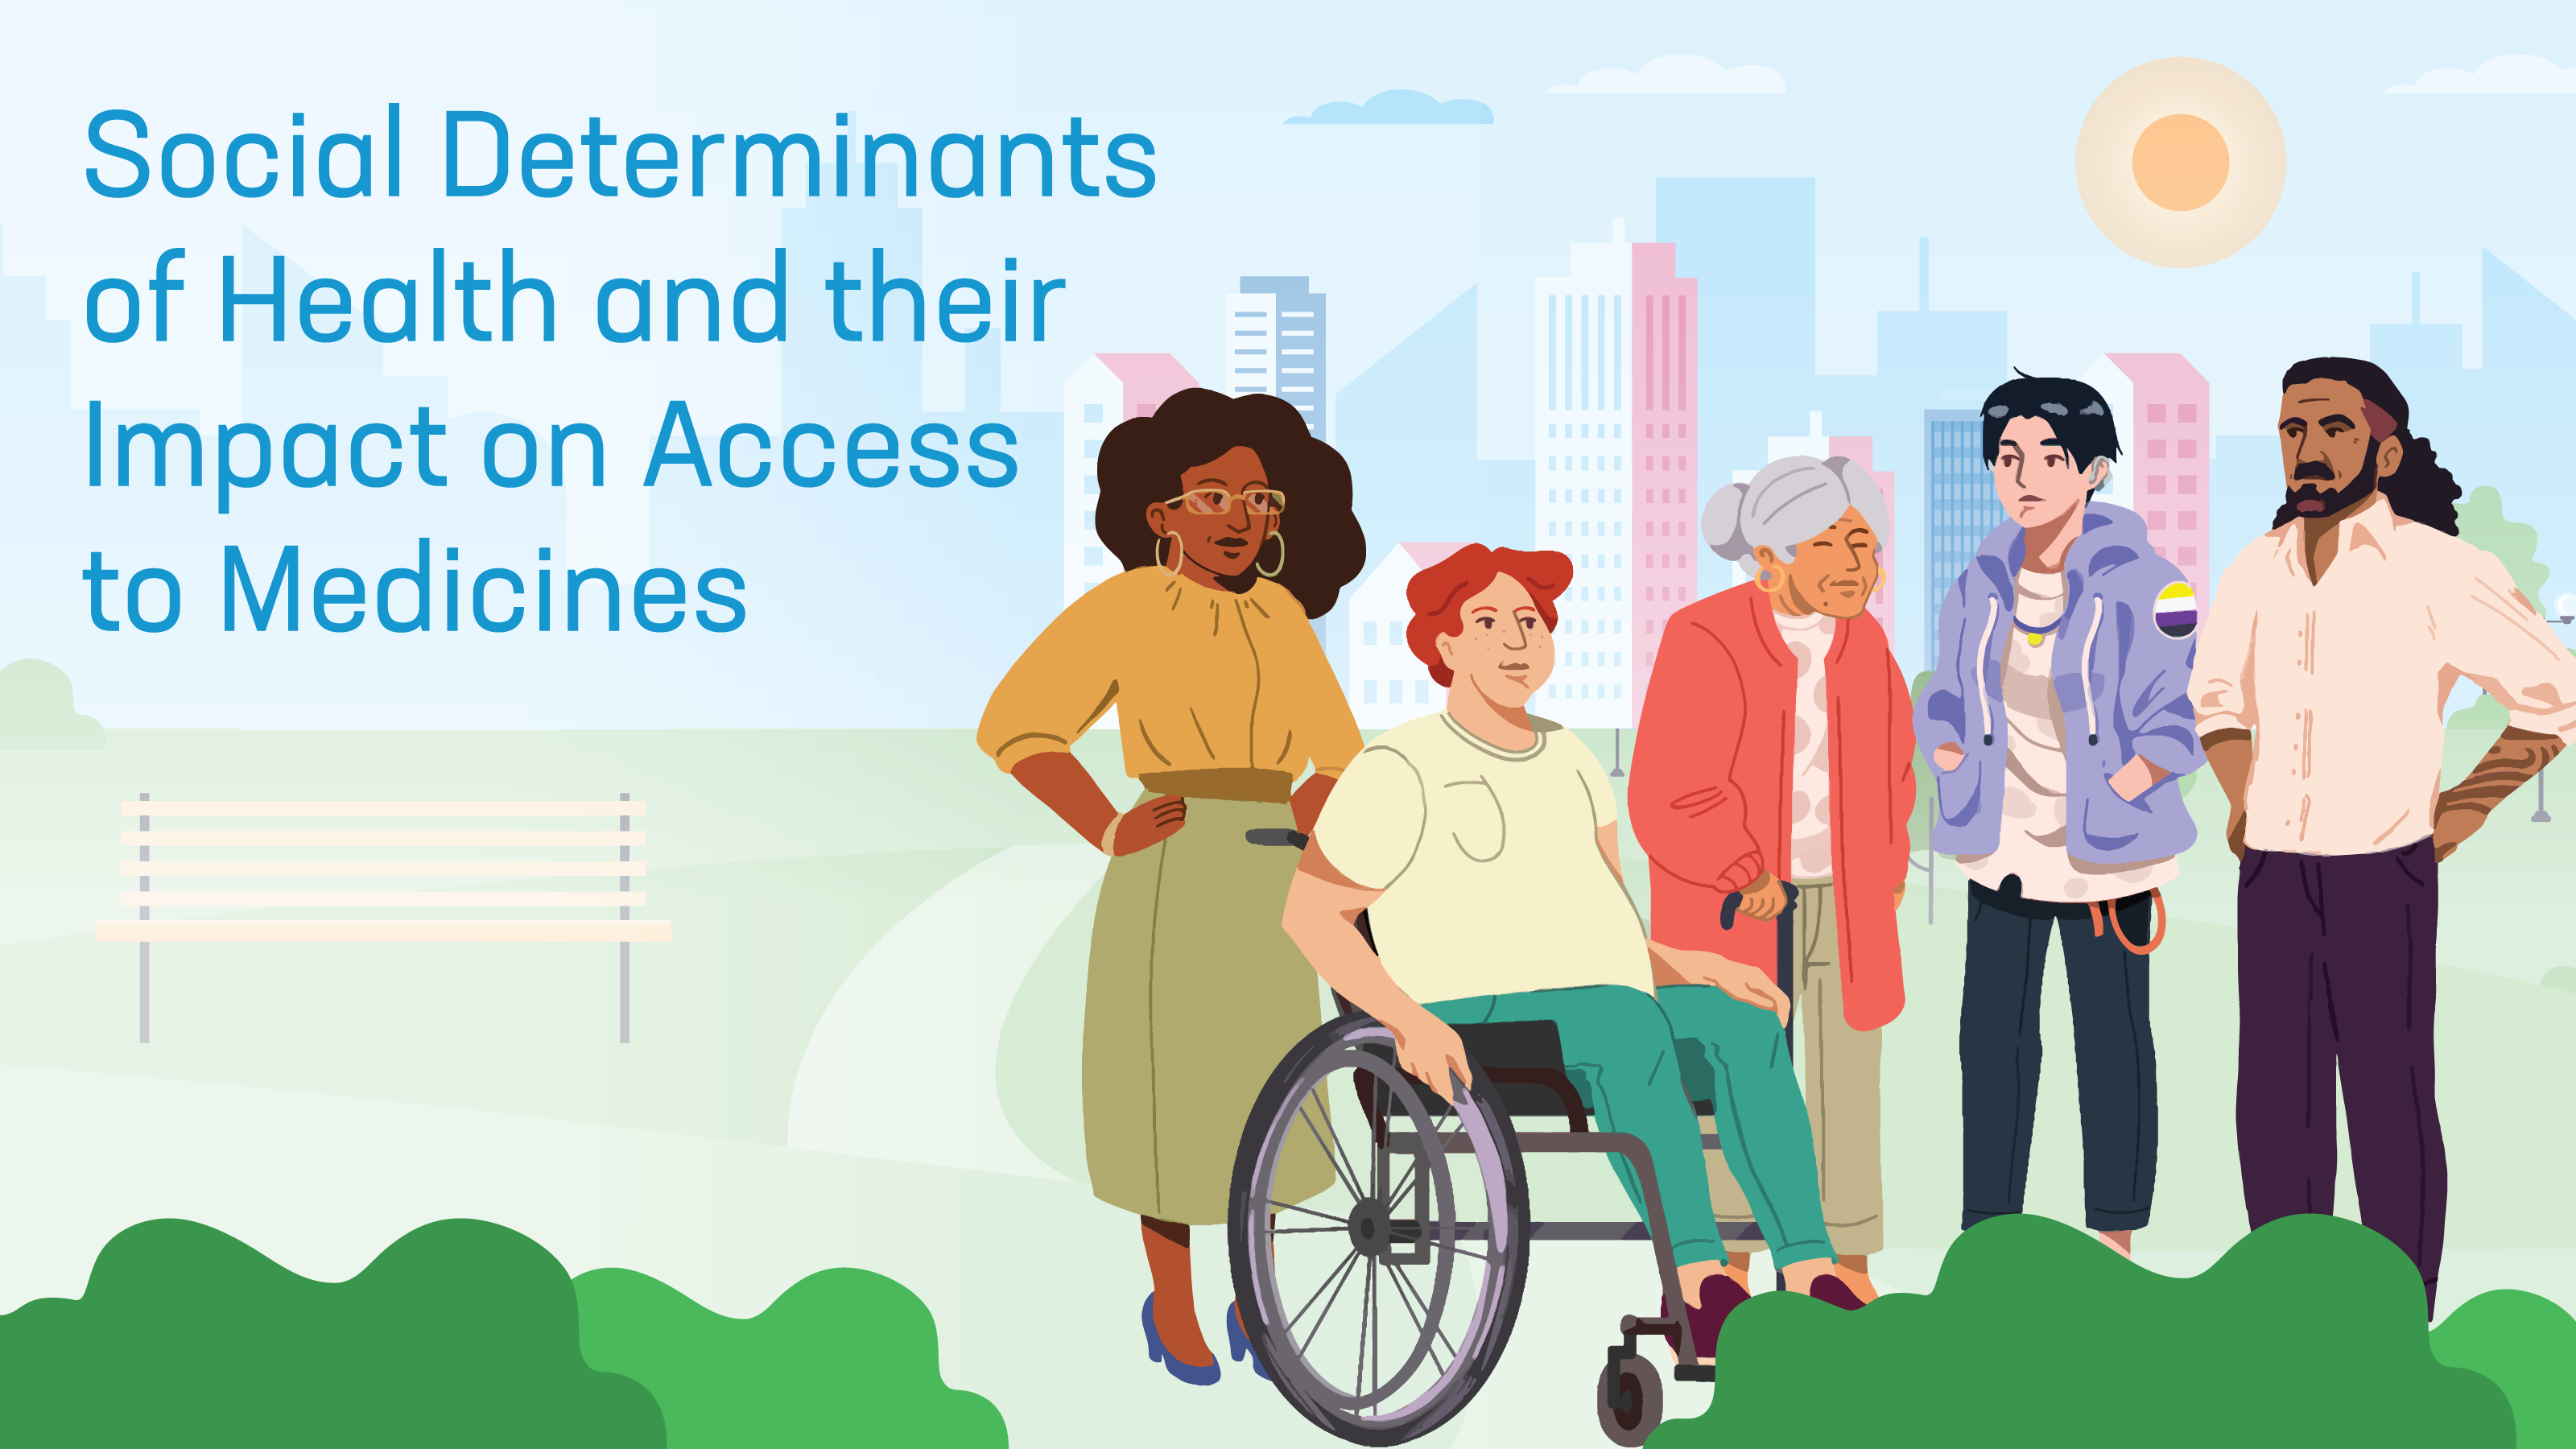 Illustrated image with five people of differing physical abilities and racial, age, and ethnic backgrounds, standing in a green space with an urban background, beside the text Social Determinants of Health and their Impact on Access to Medicines